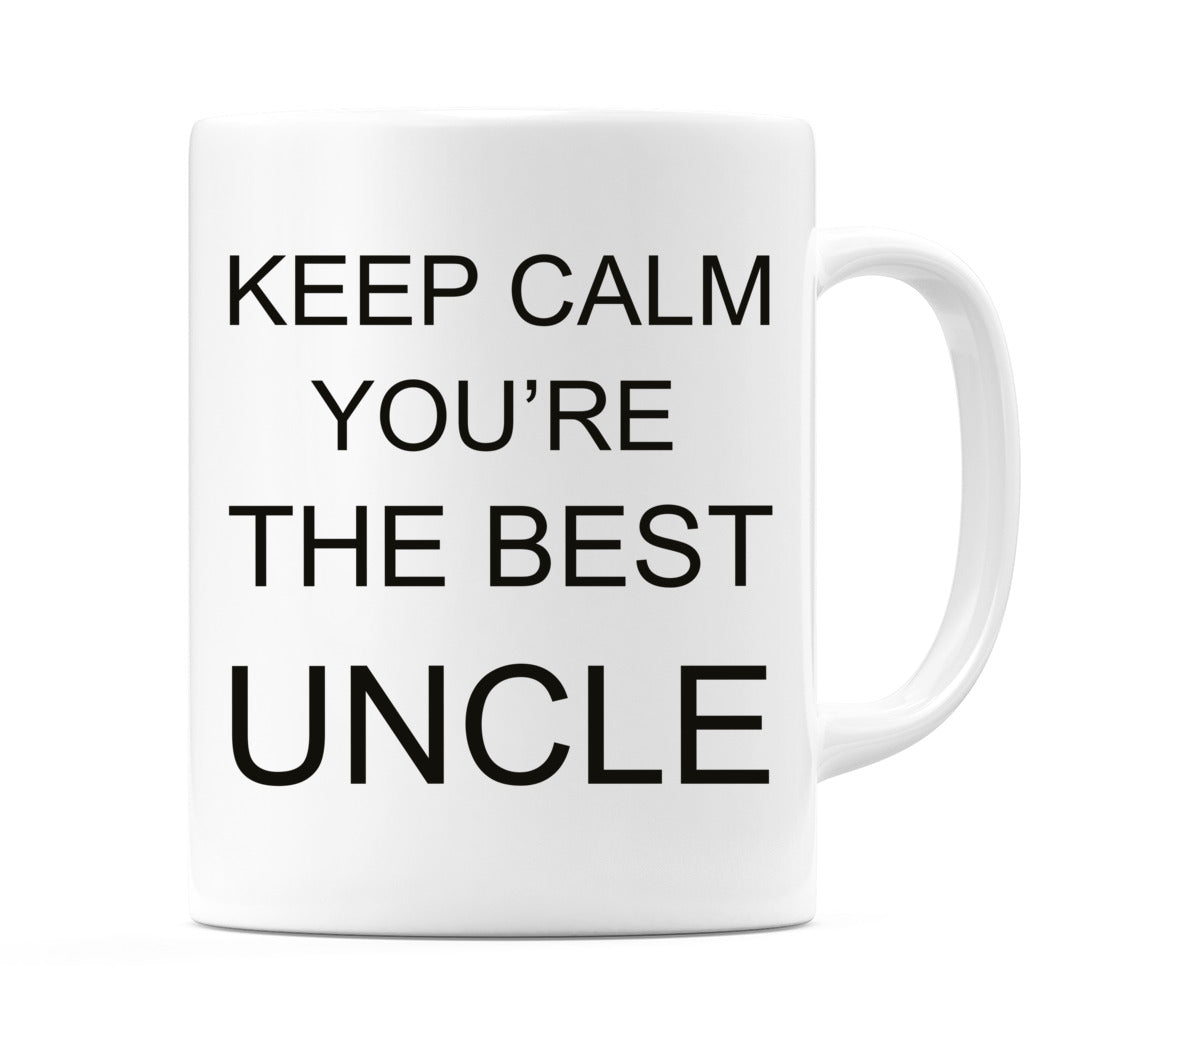 Keep Calm you're the Best Uncle Mug